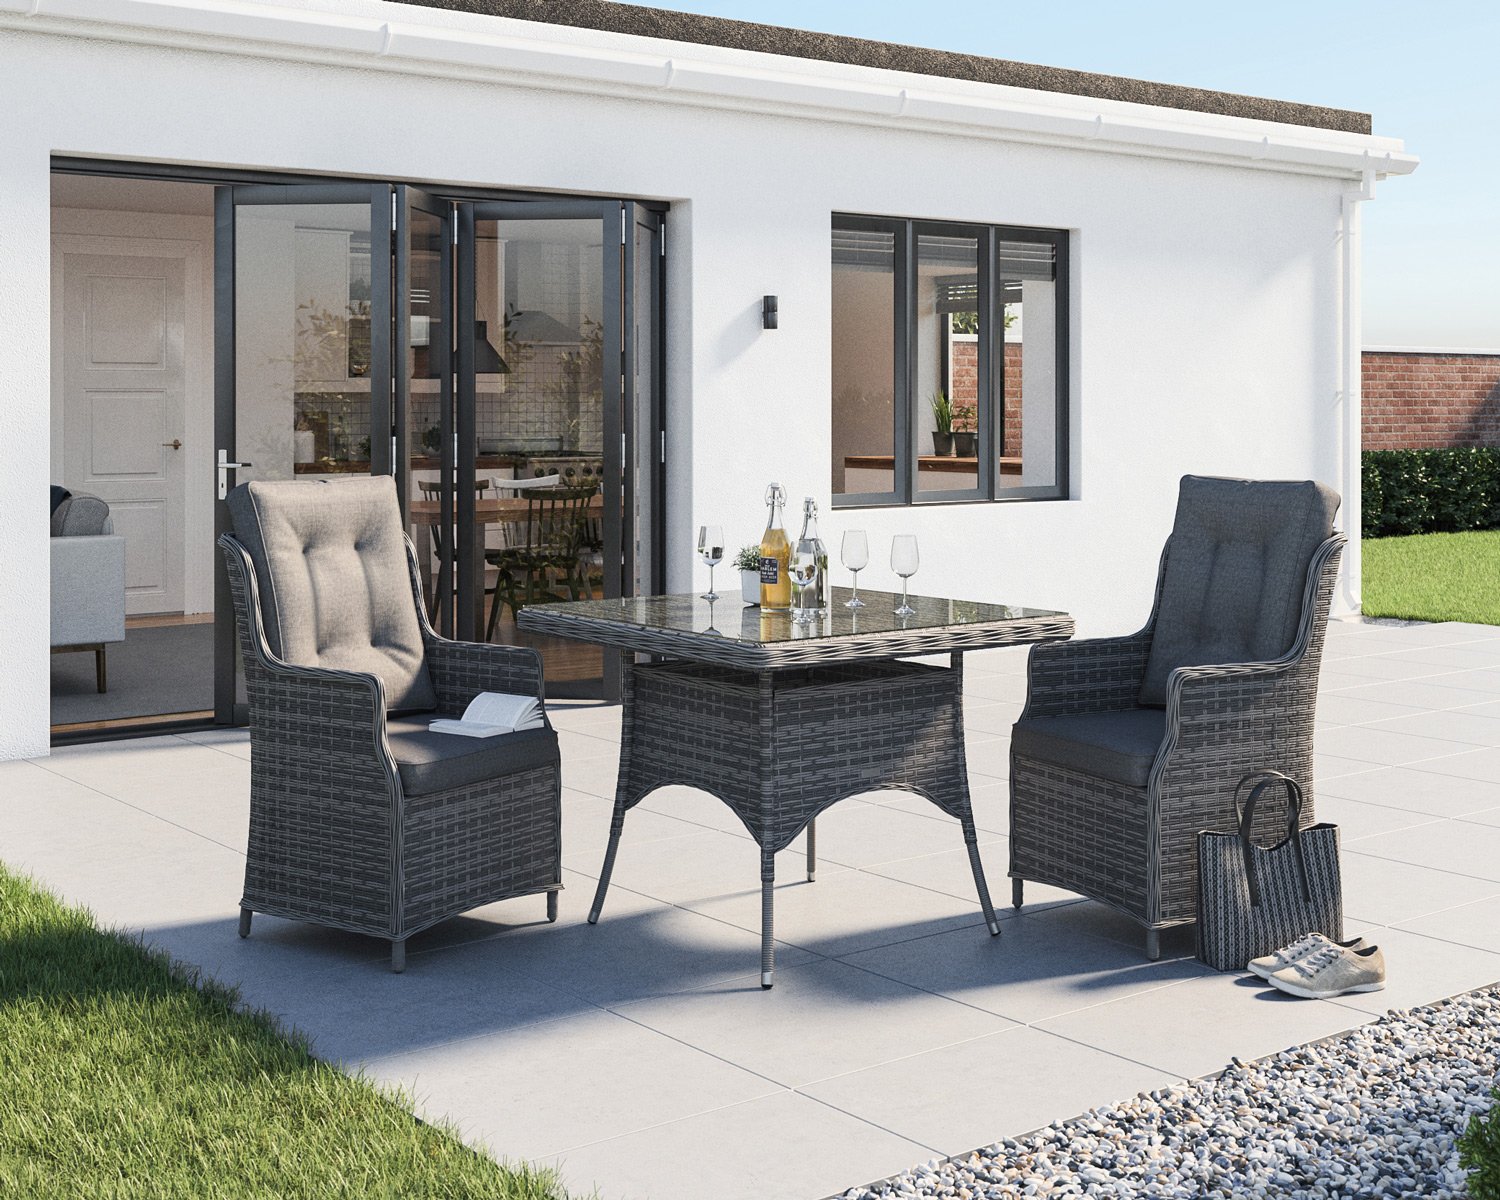 2 Seater Rattan Garden Dining Set With Square Dining Table In Grey Riviera Rattan Direct